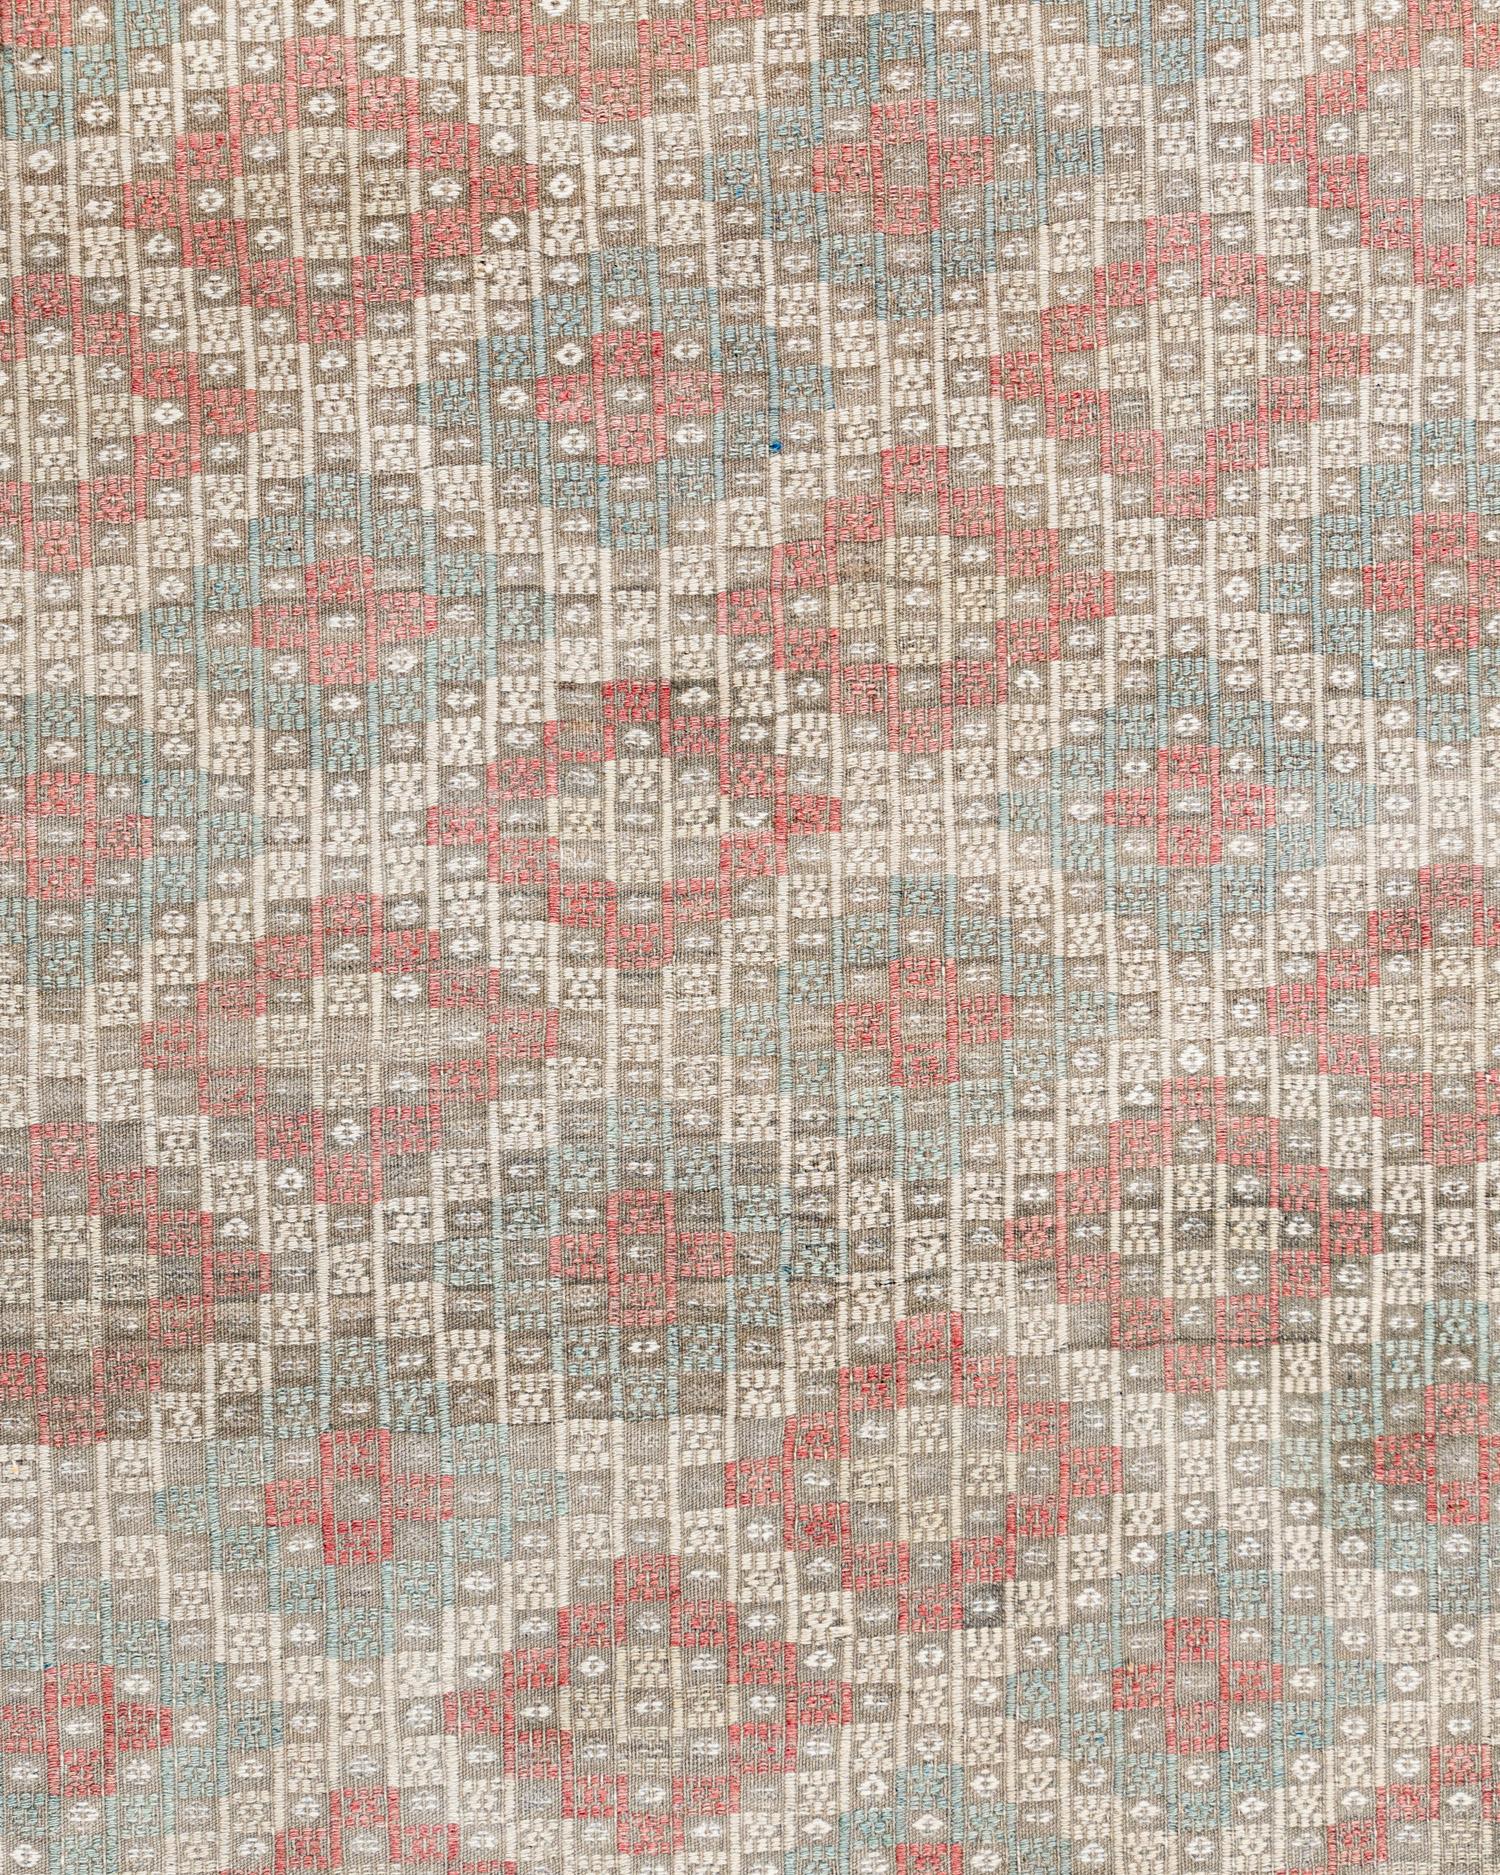 Vintage Turkish Jajim flatweave area rug 5'1 X 8'11. The Jajim (cecim) technique is followed in Turkey, Persia and the Caucasus and consists of a plain weave (equal warps and wefts) ground with an added (supplementary) weft pattern. The wefts are